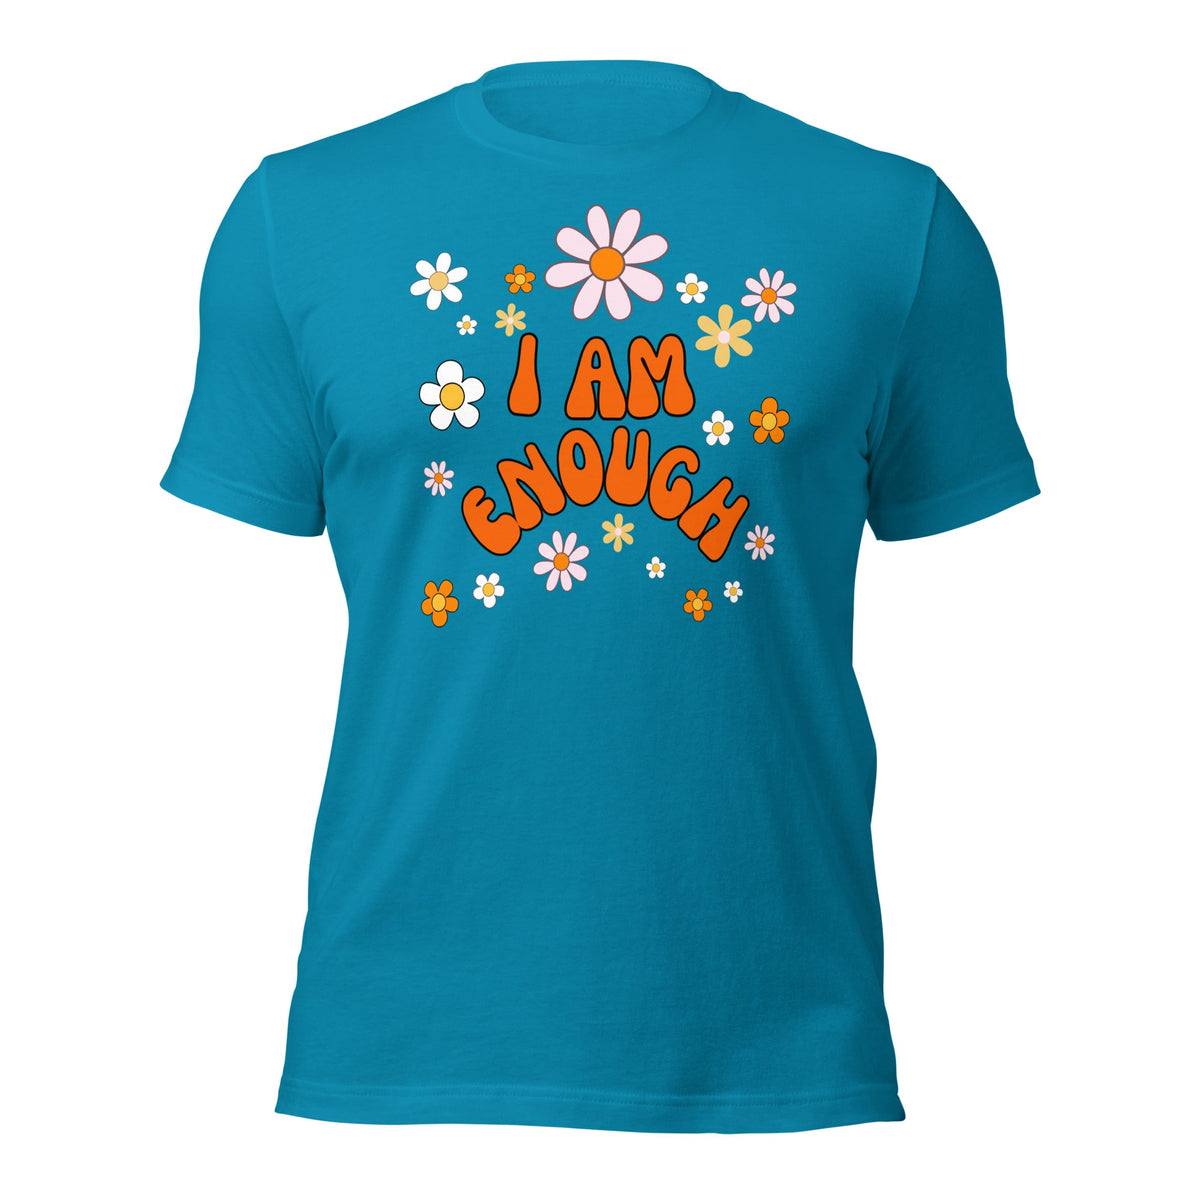 I AM ENOUGH Flower Power Inspirational Affirmation Graphic T-Shirt for Women | I Am Enough Collection